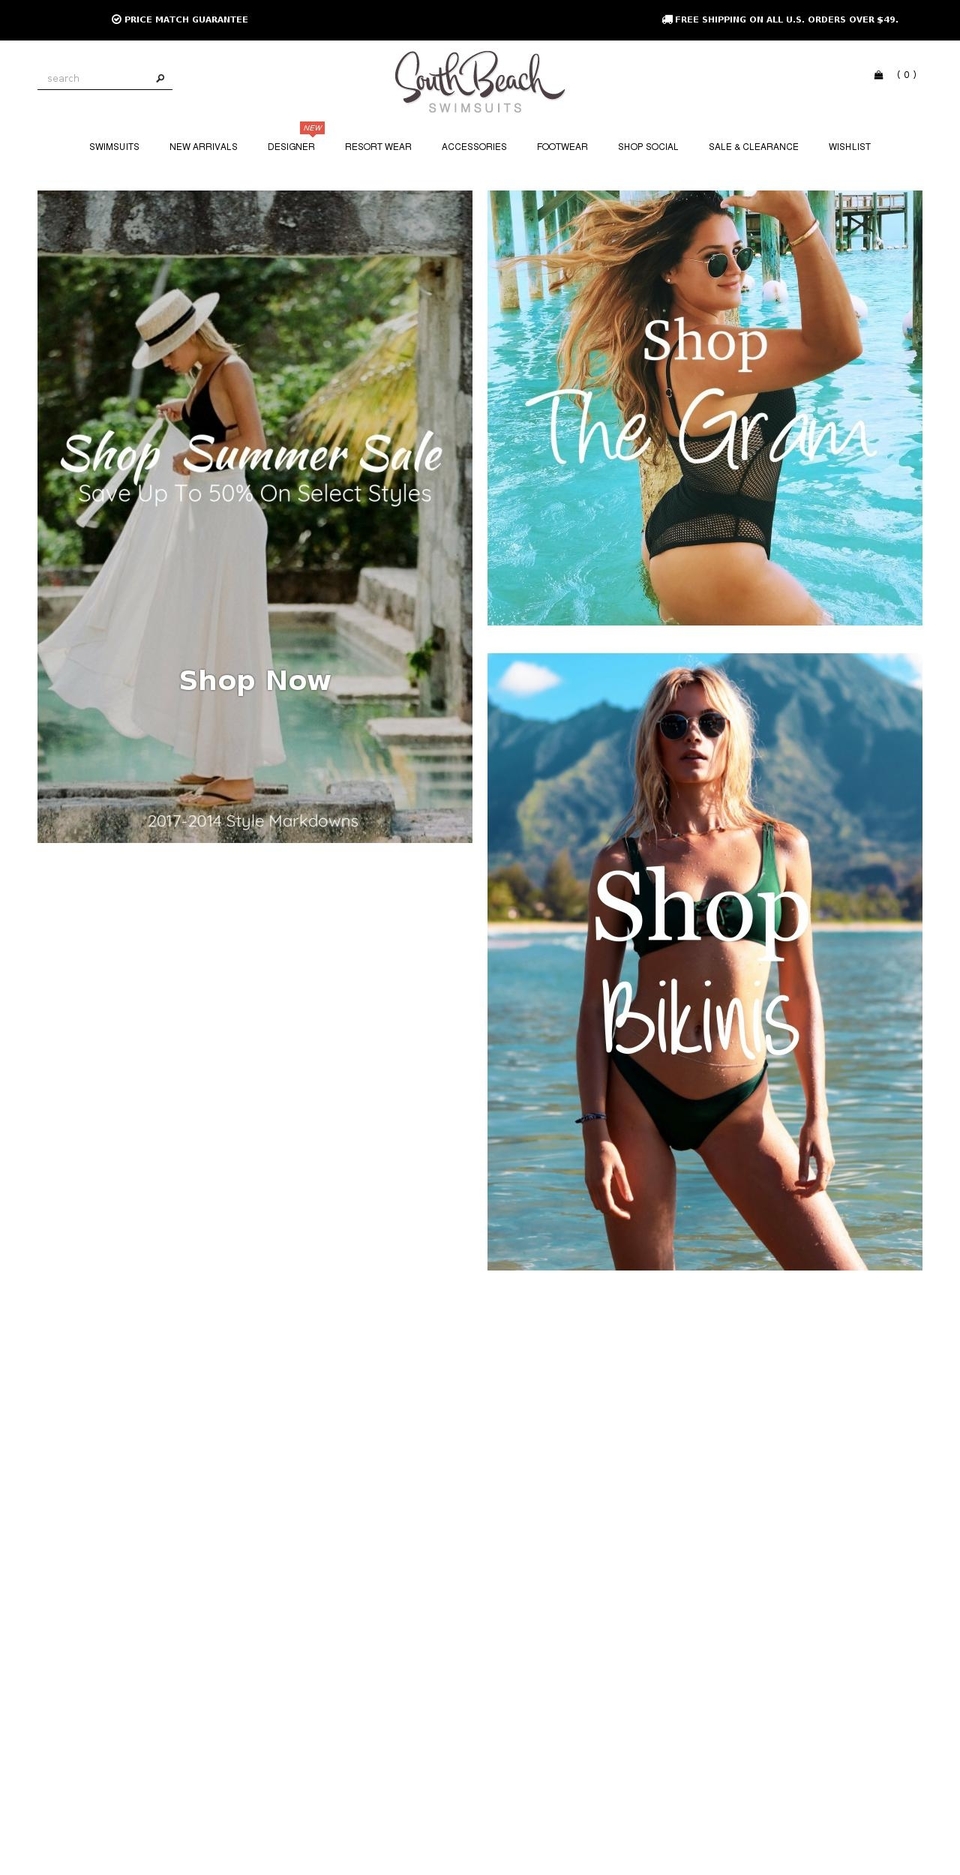 Made With ❤ By Minion Made - Updated Checkout Shopify theme site example beachyqueen.com